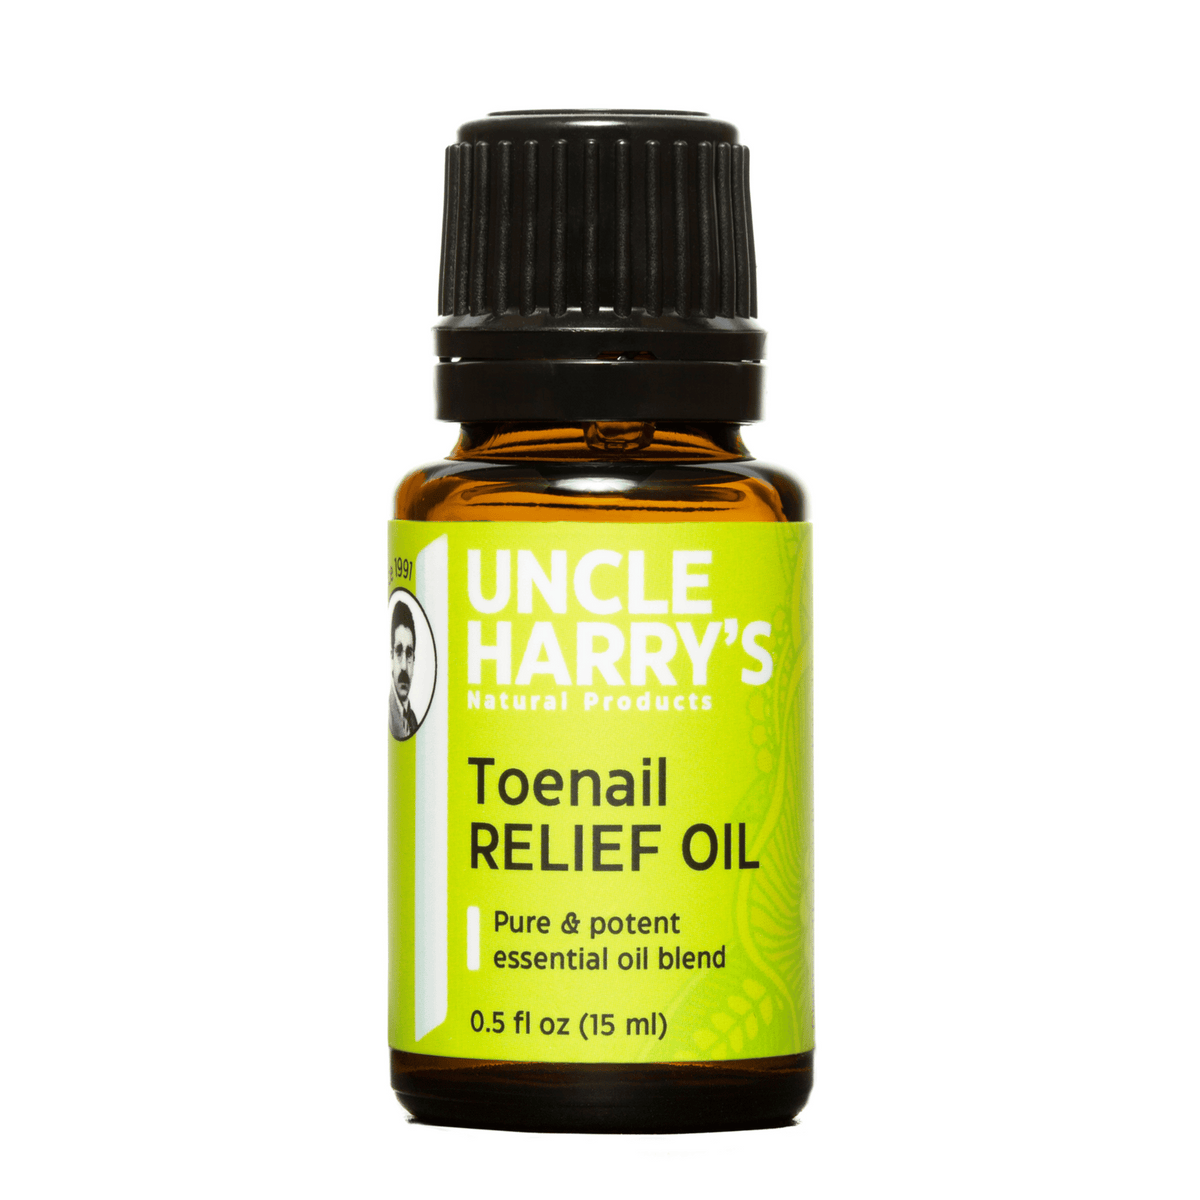 Primary Image of Toenail and Fungal Relief Oil